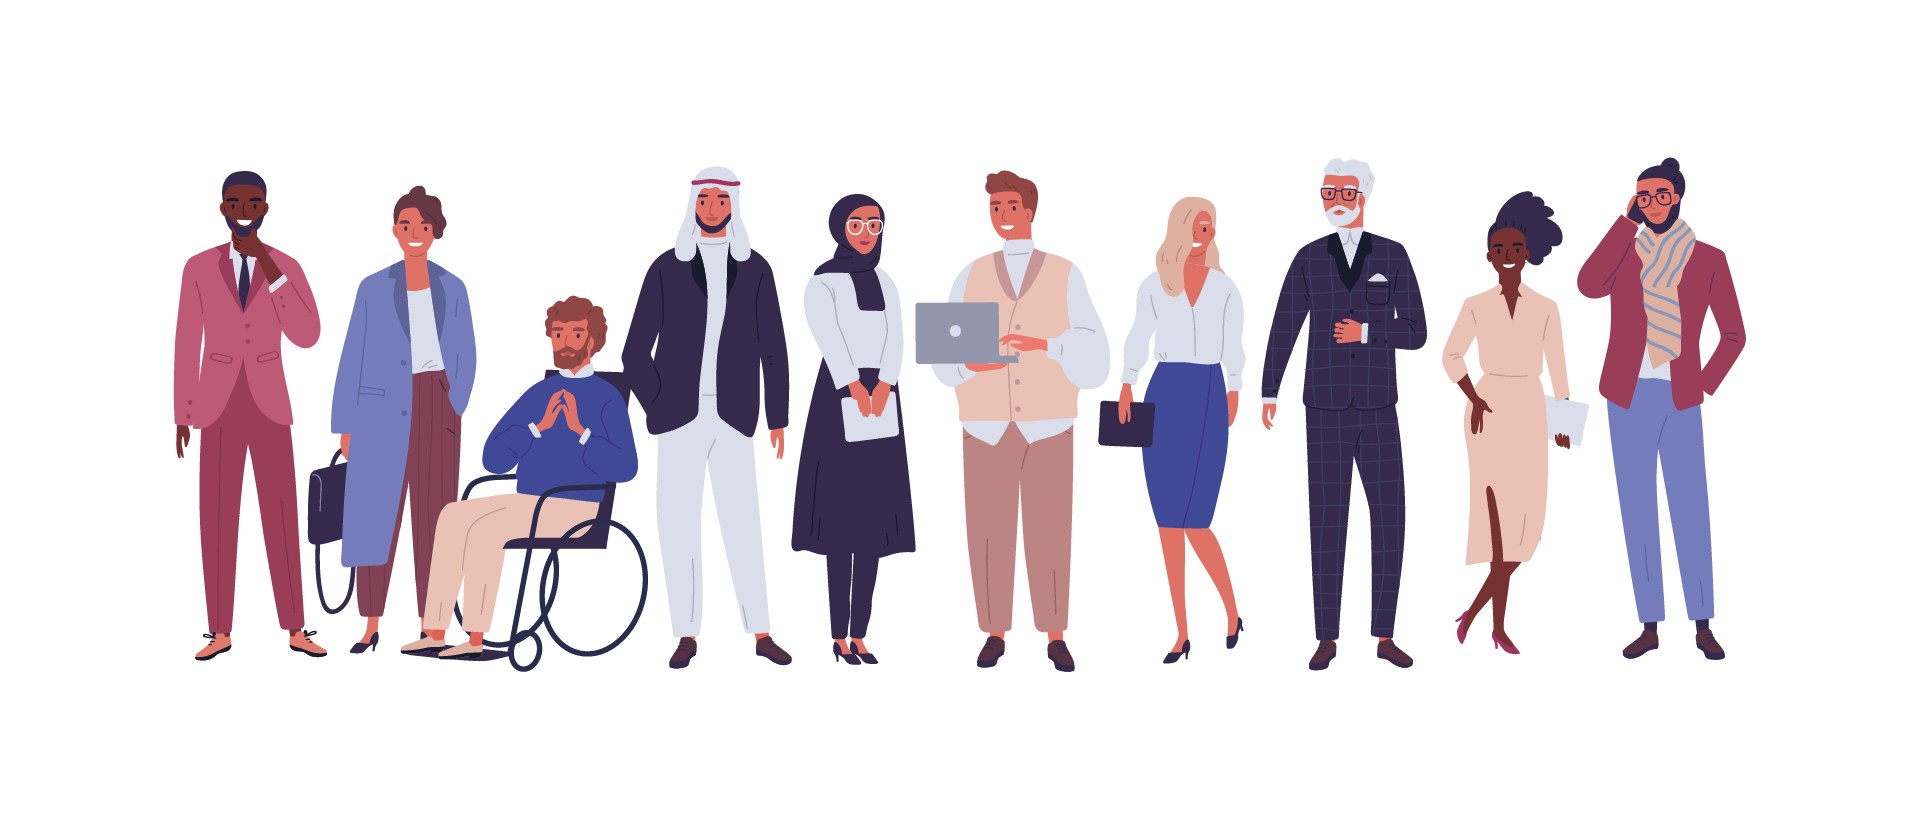 Diverse group of people illustration